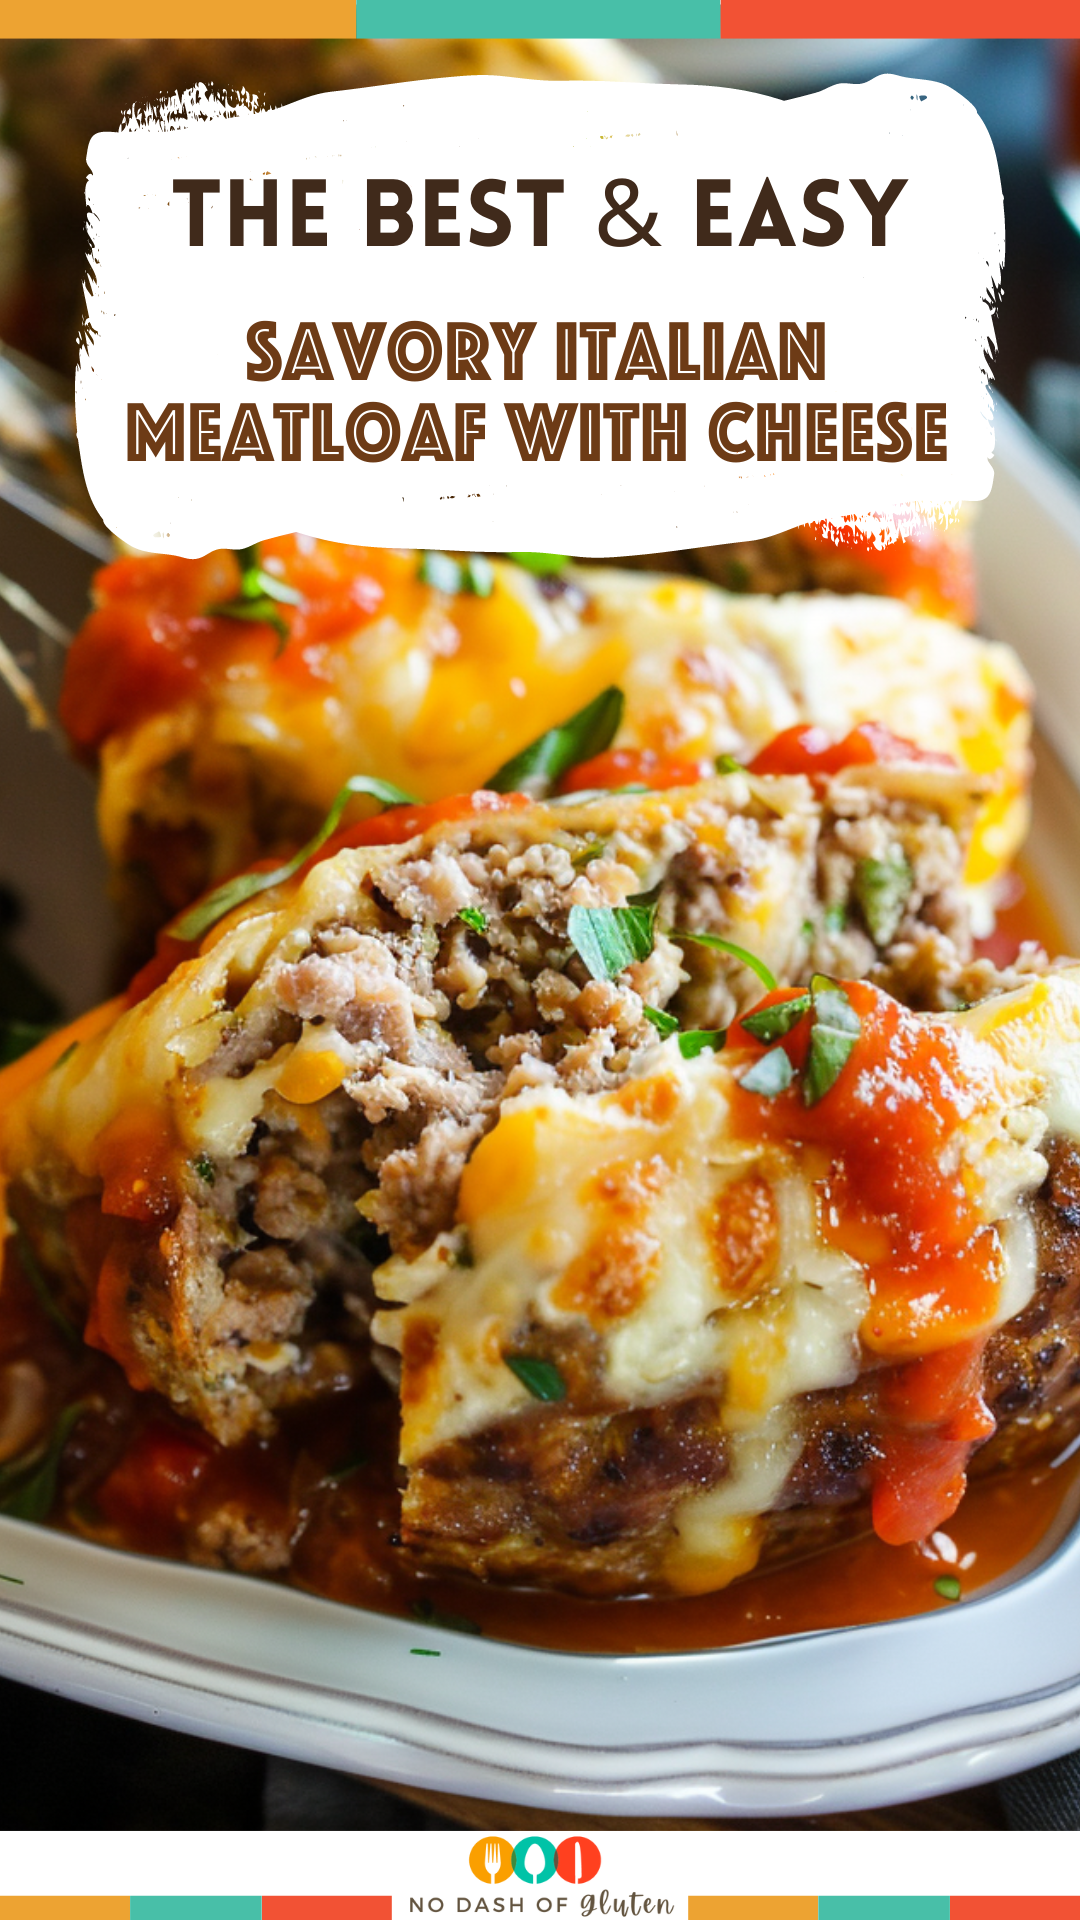 Savory Italian Meatloaf with Cheese